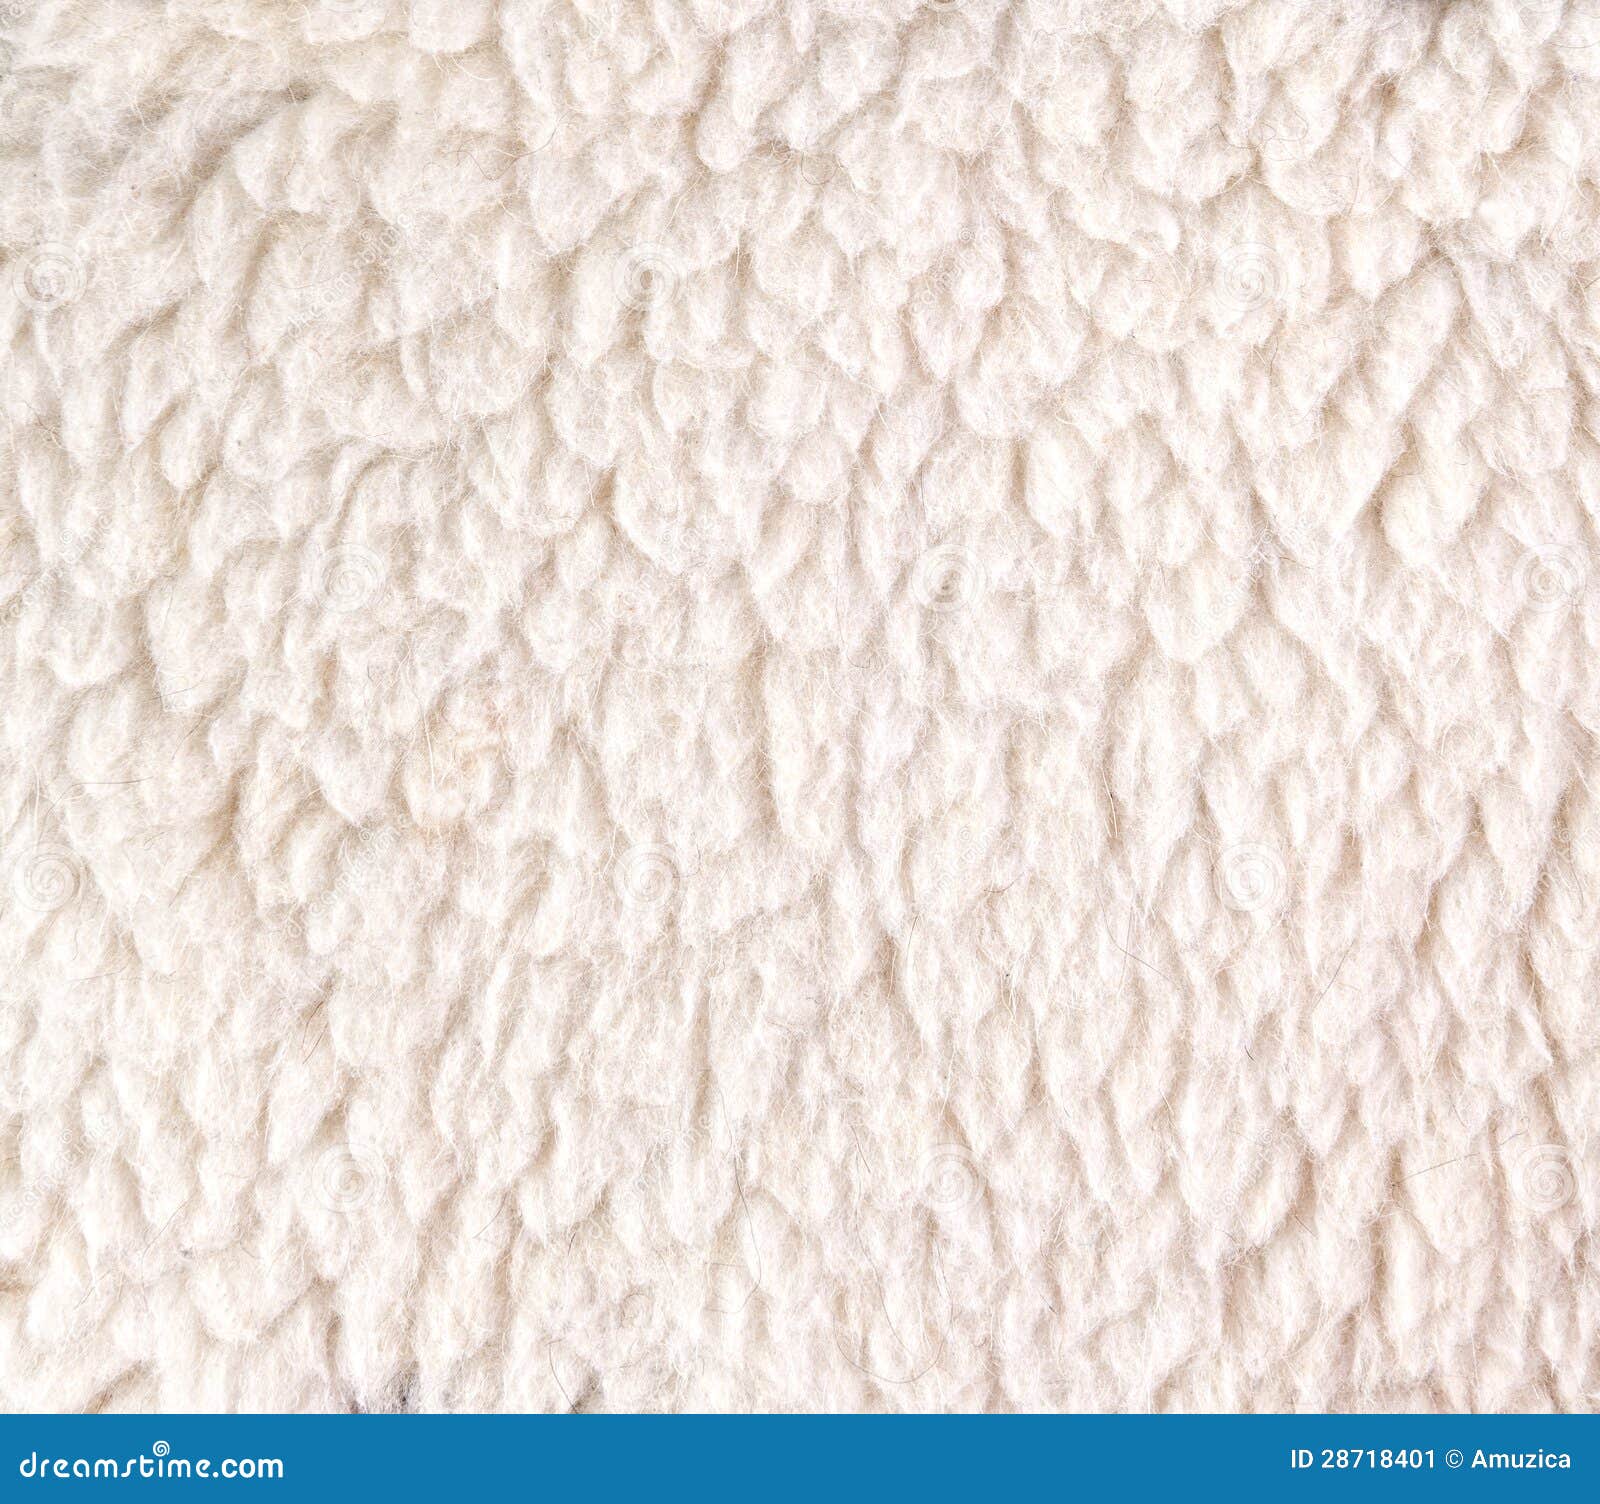 White Woolly Sheep Fleece For Background Stock Image - Image: 28718401